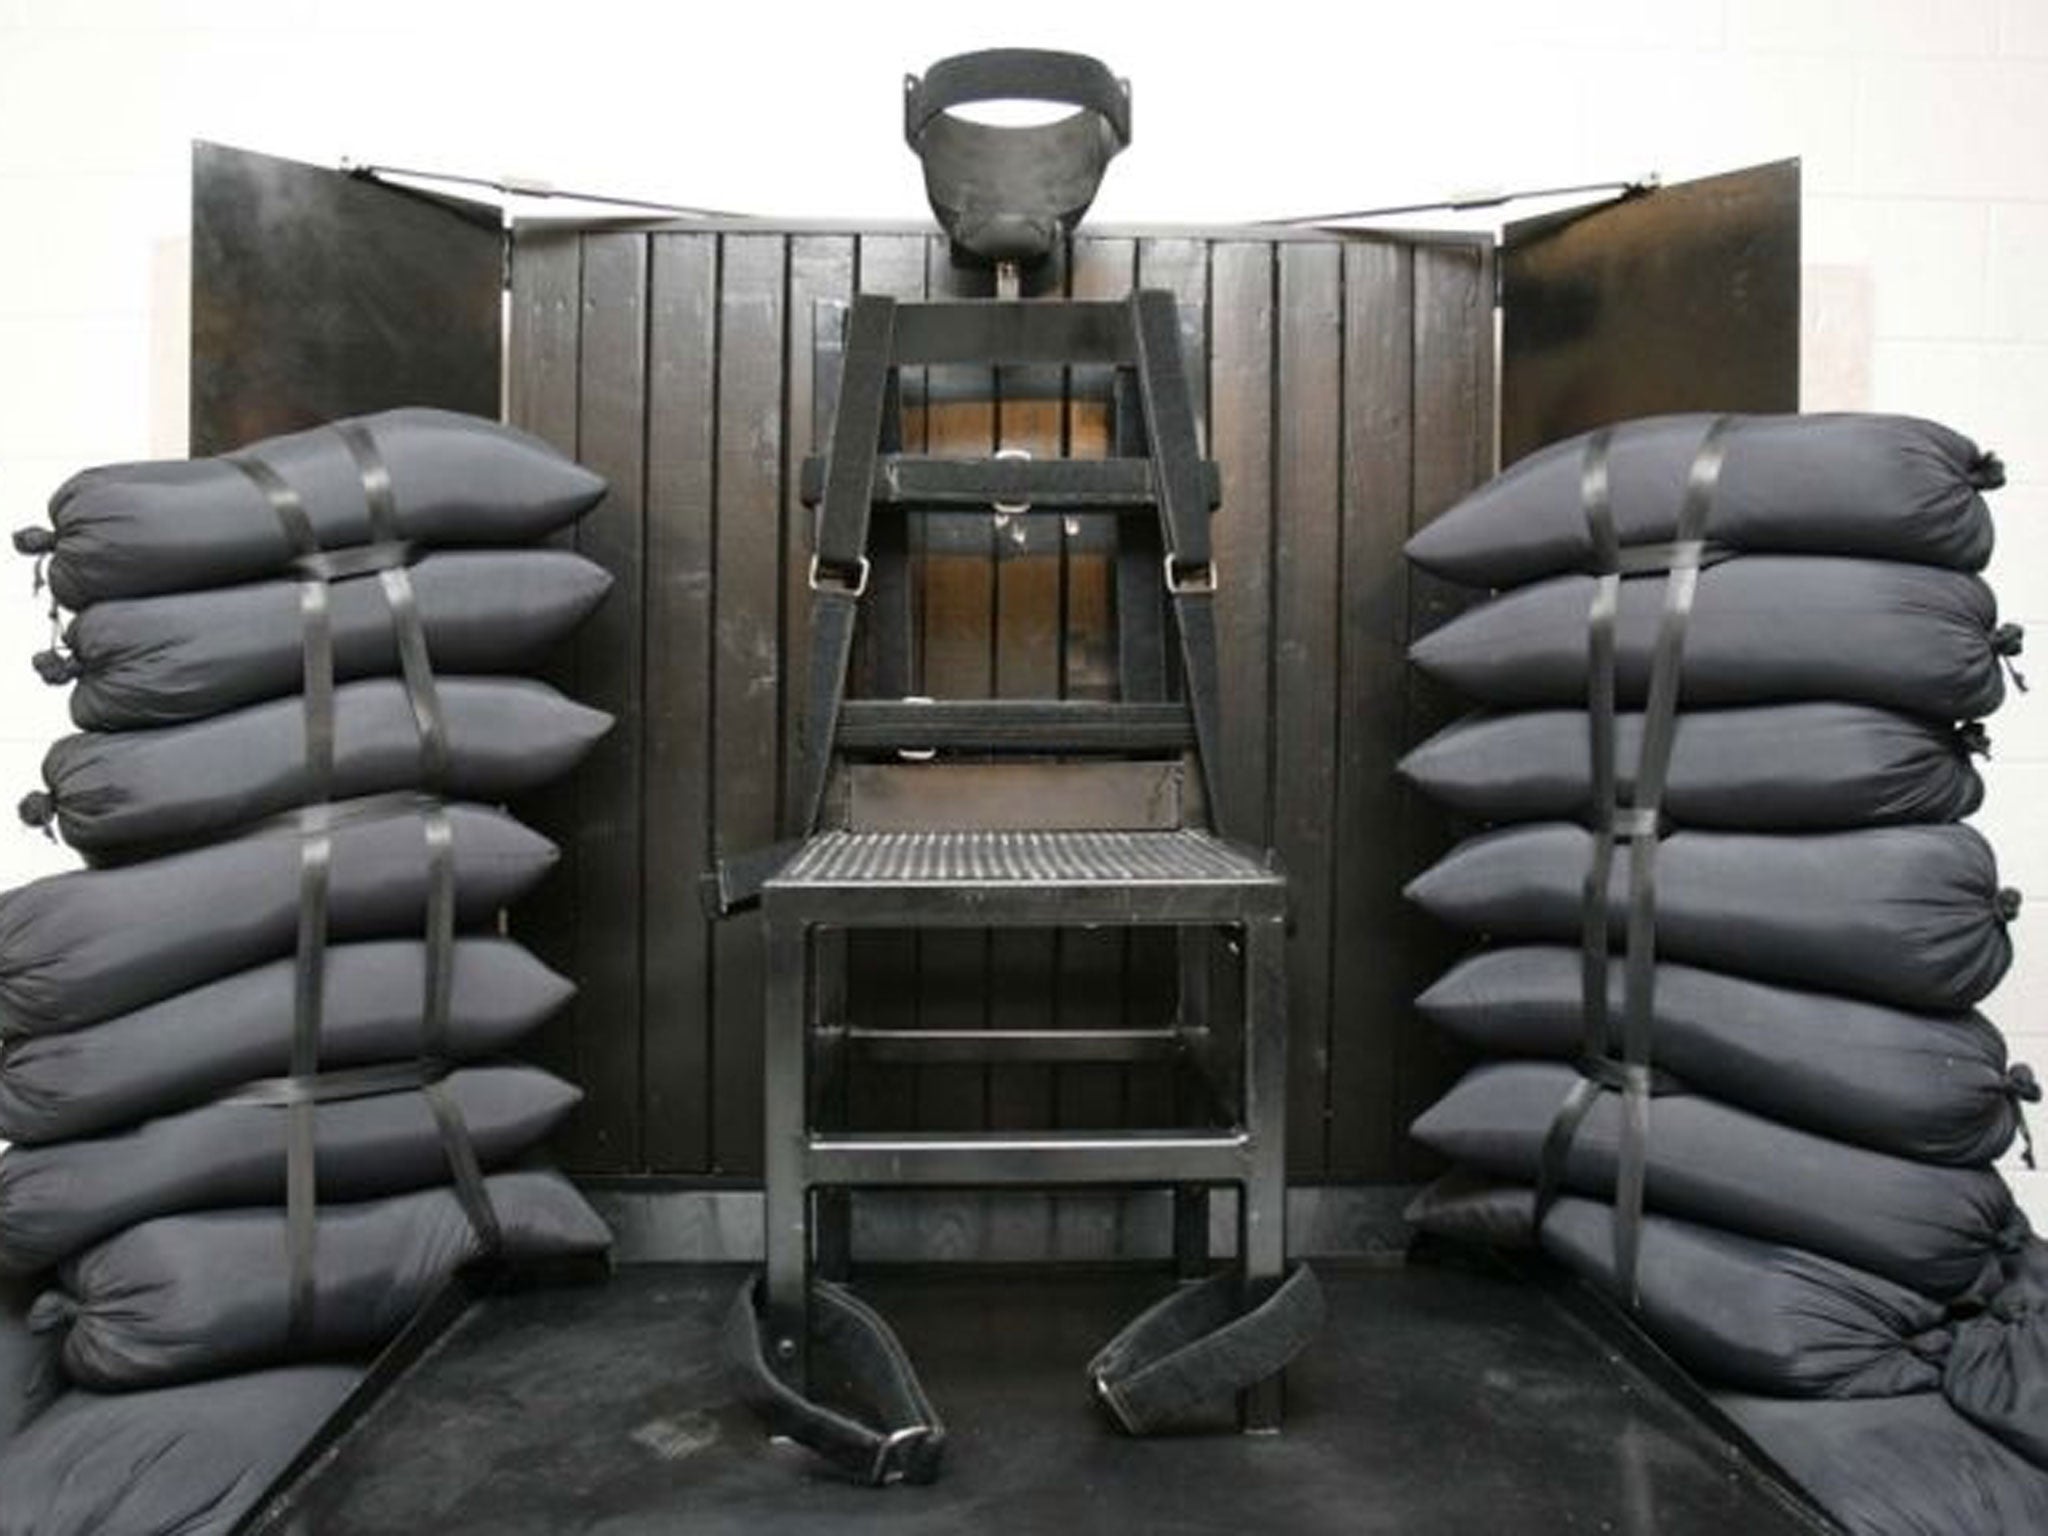 The firing squad execution chamber at the Utah State Prison in Draper, Utah.